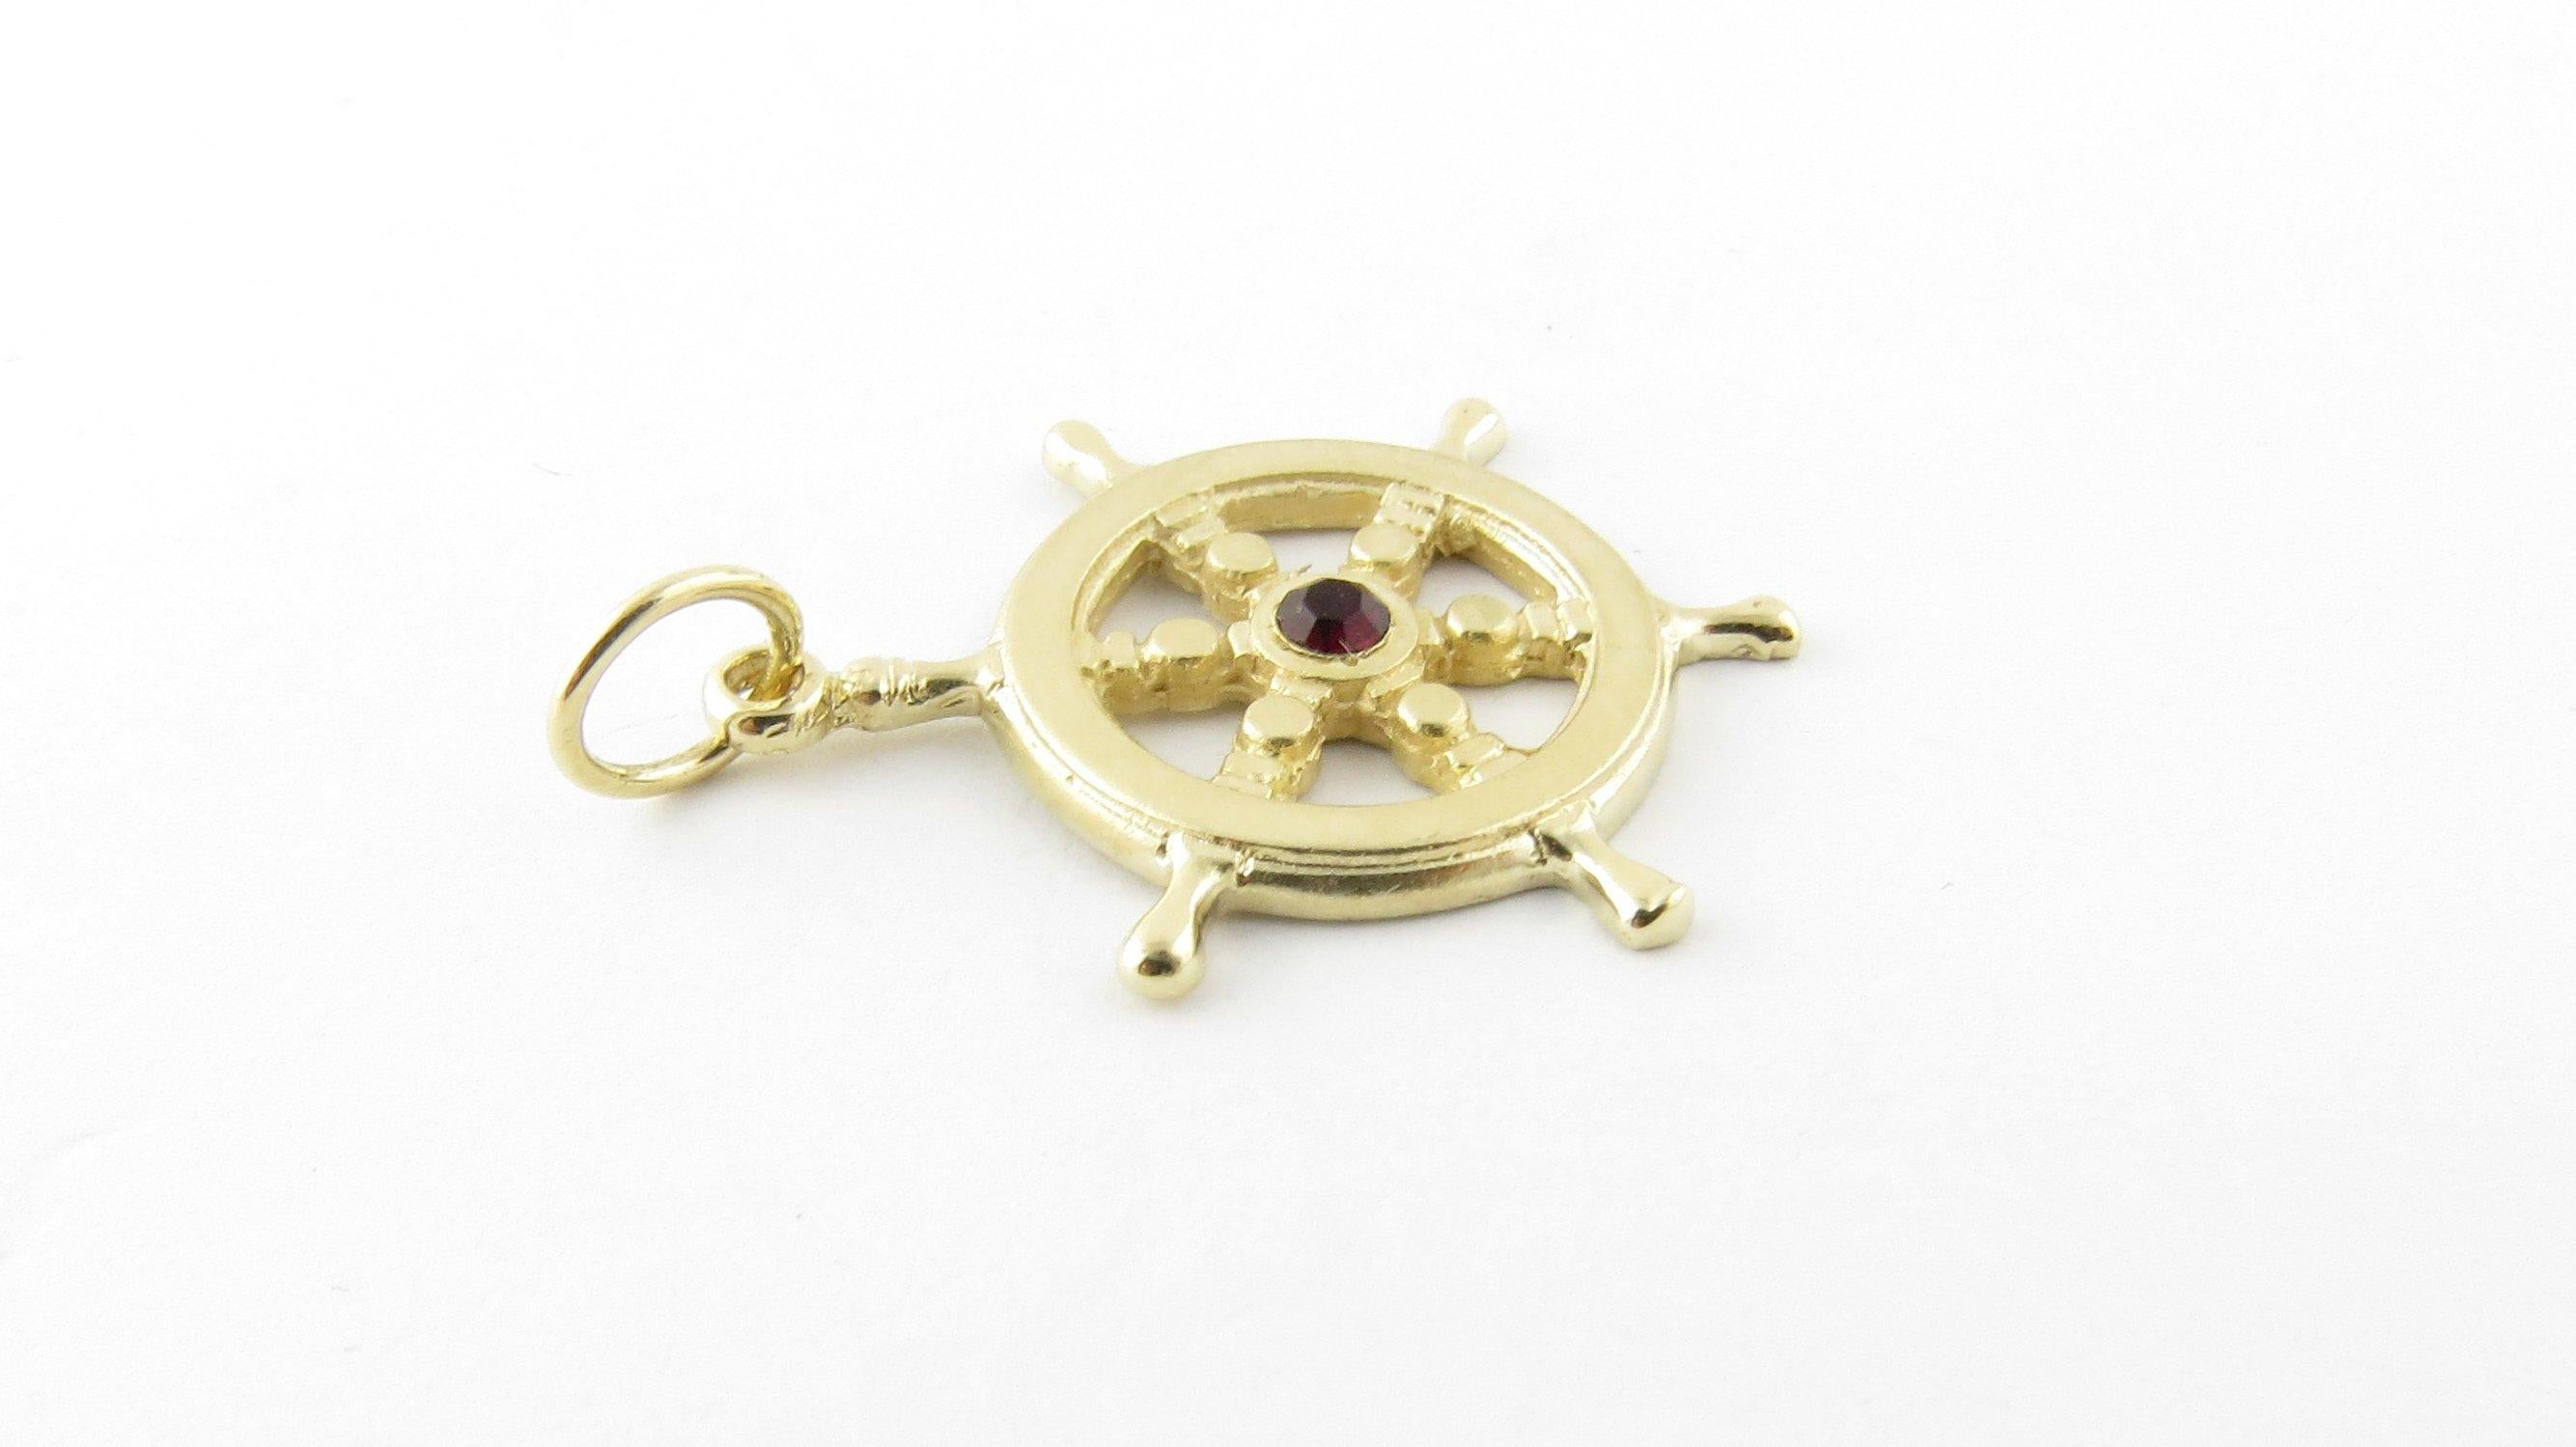 Vintage 14 Karat Yellow Gold and Synthetic Ruby Ship's Wheel Pendant. This nautical pendant features a miniature ship's wheel accented with a synthetic red ruby in its center.
Size: 27 mm x 23 mm Weight: 2.0 dwt. / 3.2 gr. Stamped: 14K Very good